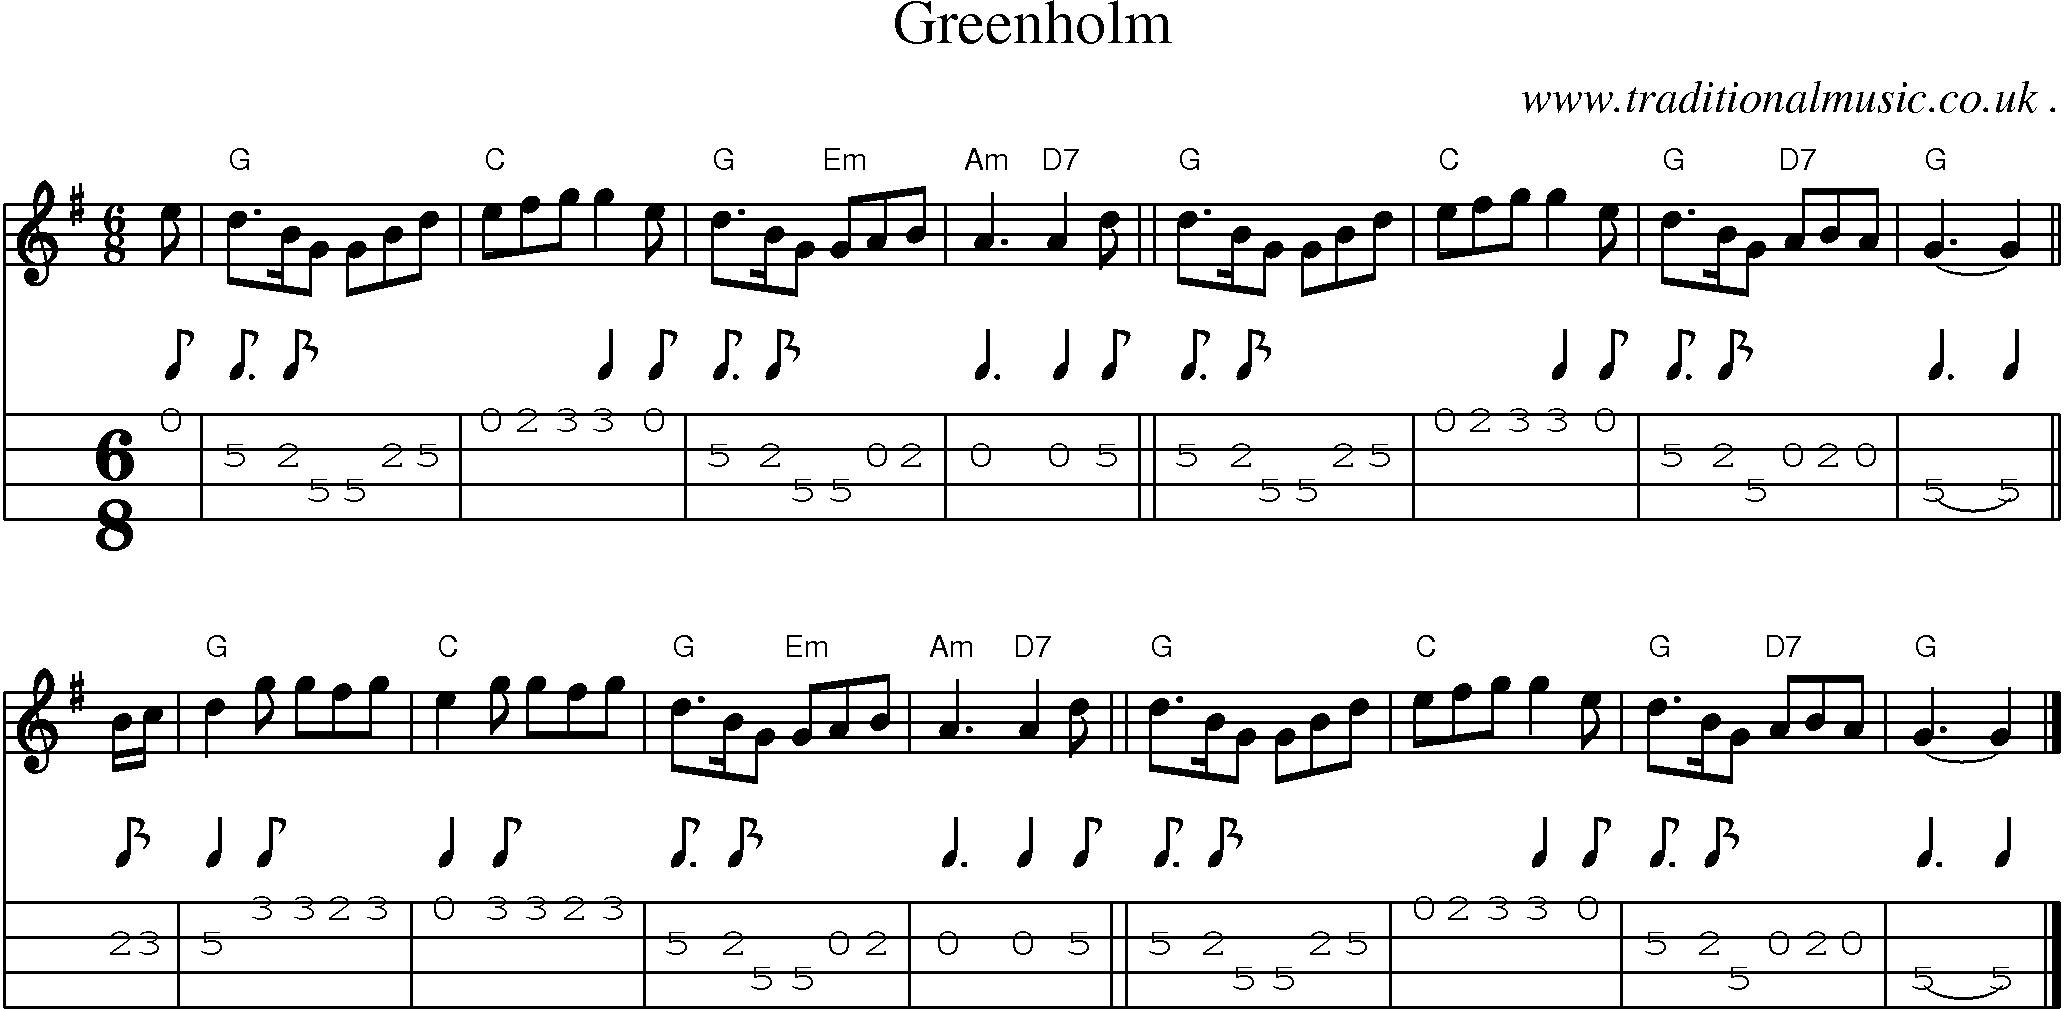 Sheet-music  score, Chords and Mandolin Tabs for Greenholm